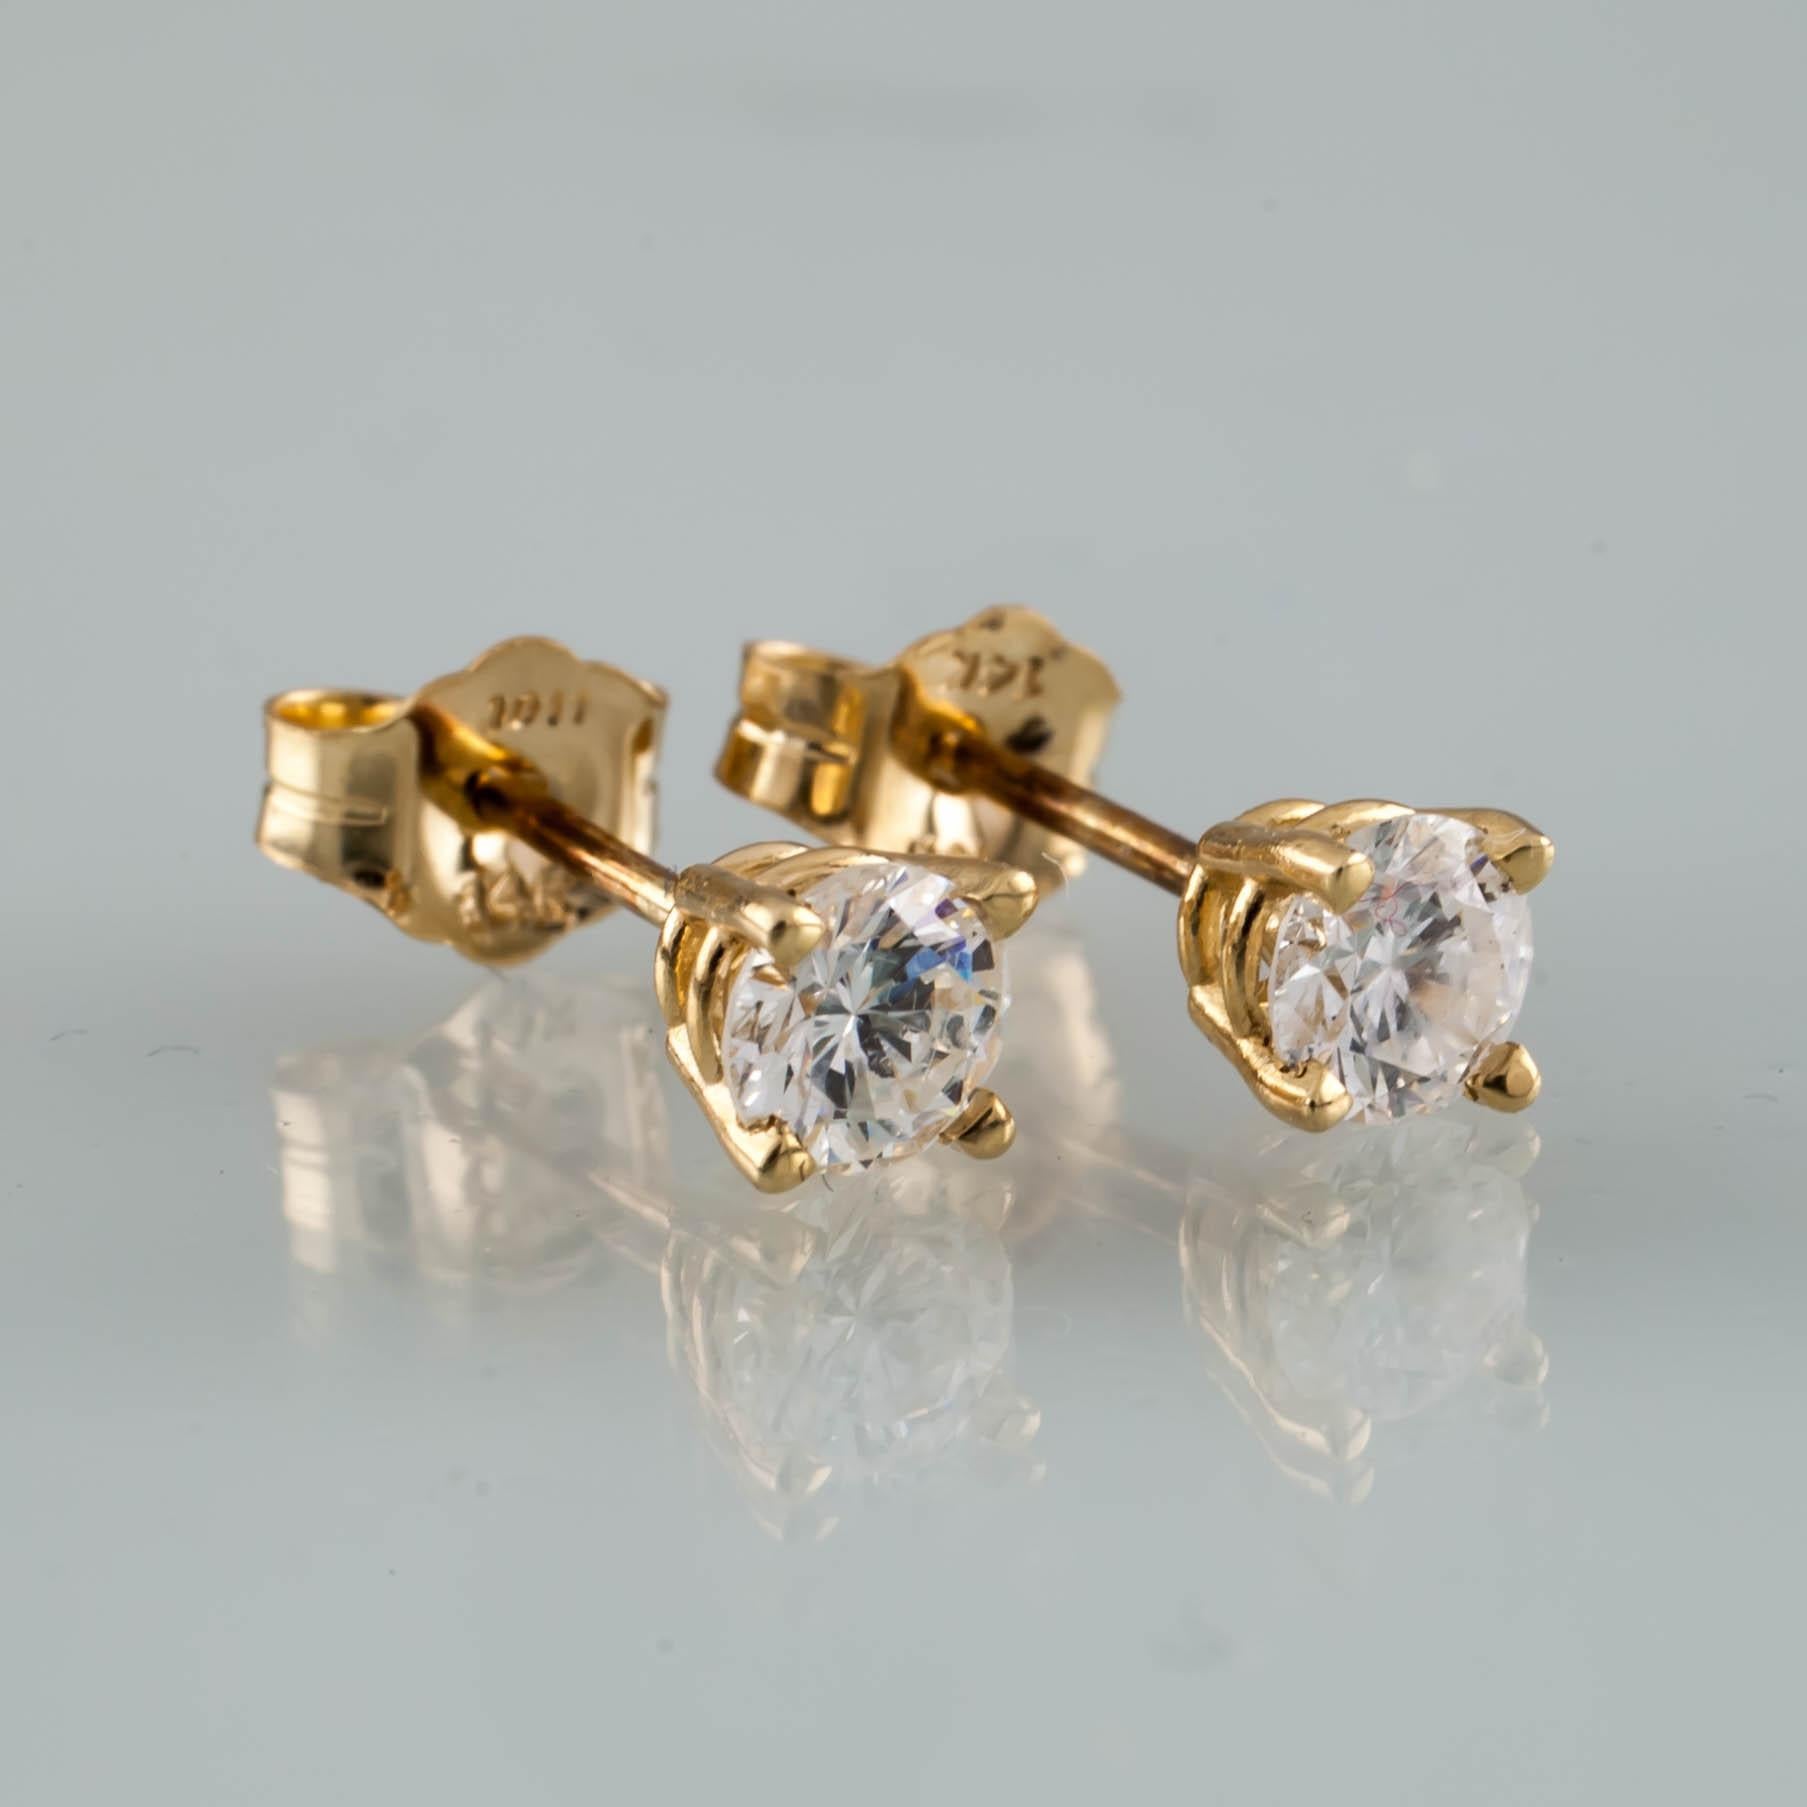 Gorgeous Round Diamond Stud Earrings
14k Yellow Gold Prong Settings w/ Butterfly Backs
Total Diamond Weight = Approximately 0.50 ct
Average Color = G
Average Clarity = VS
Total Mass = 0.73 grams